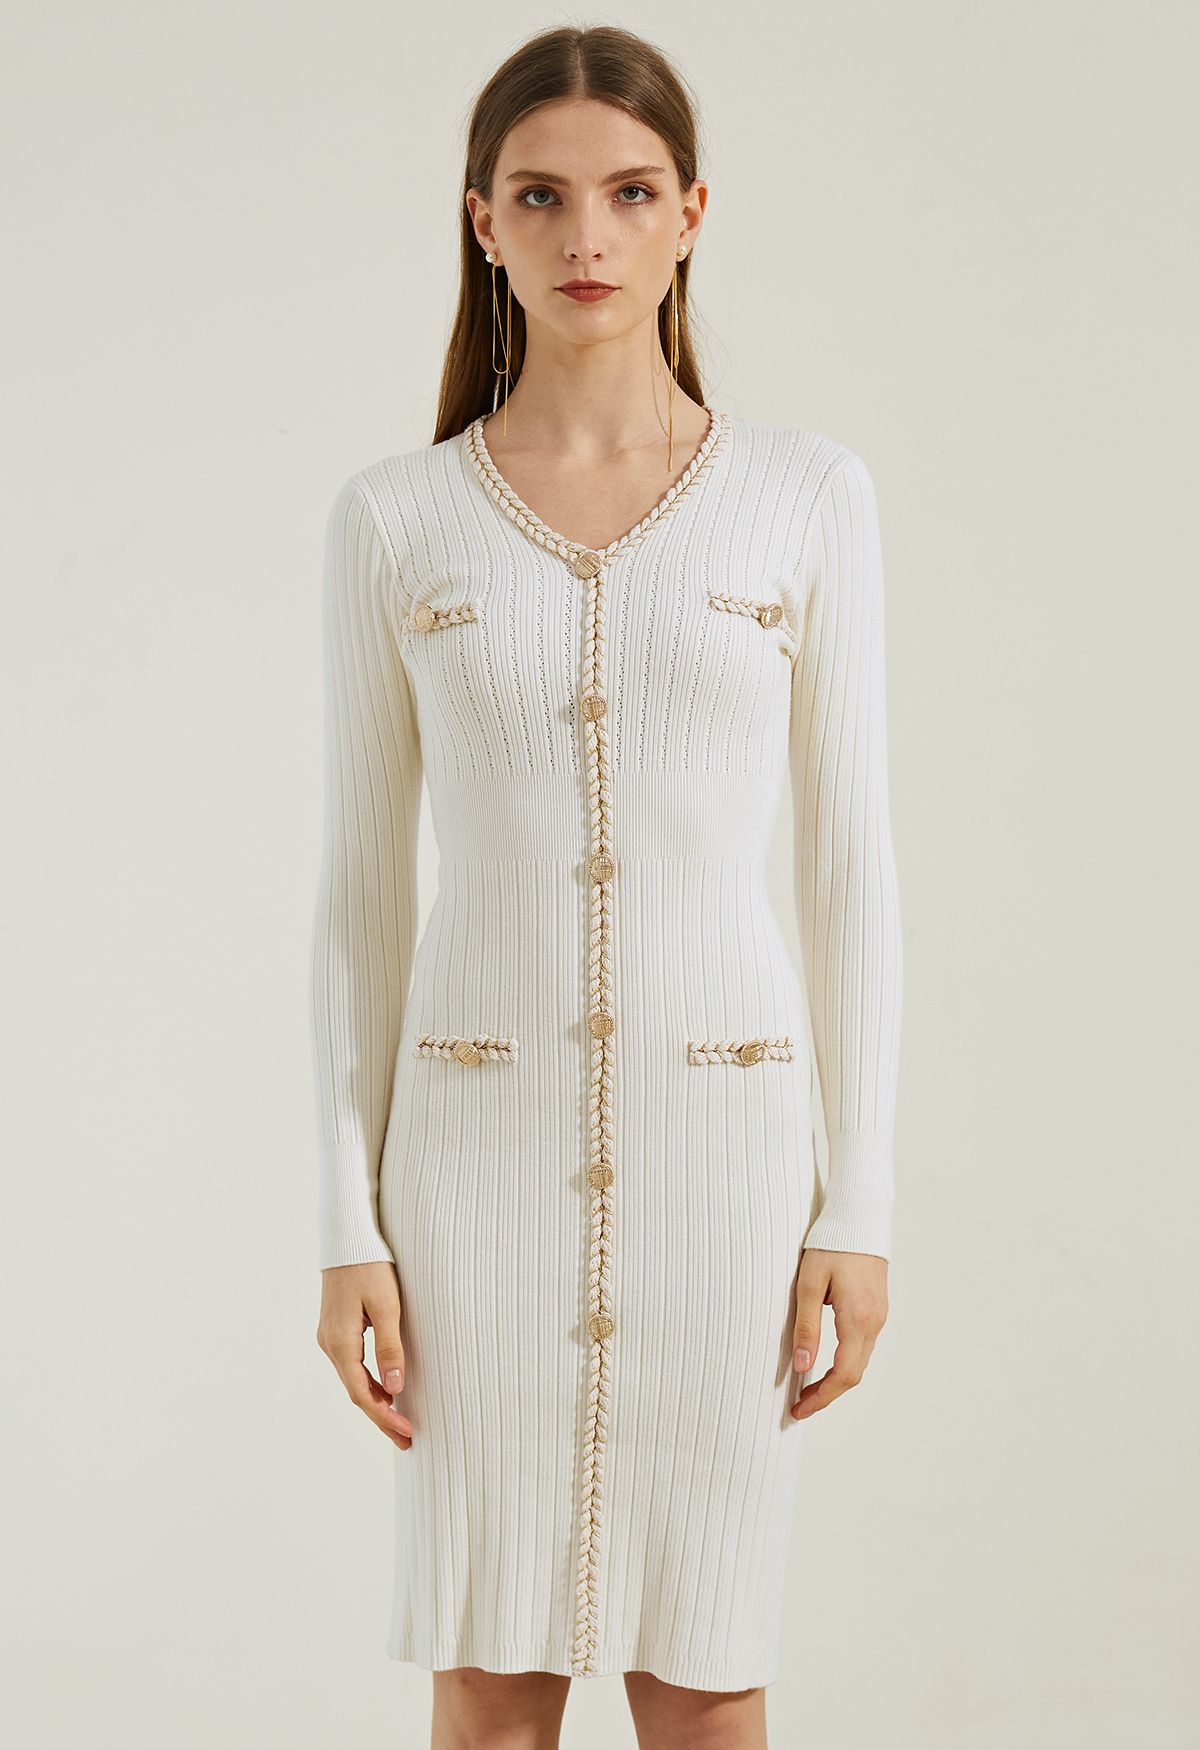 Braided Edge Golden Button Bodycon Knit Dress in Ivory